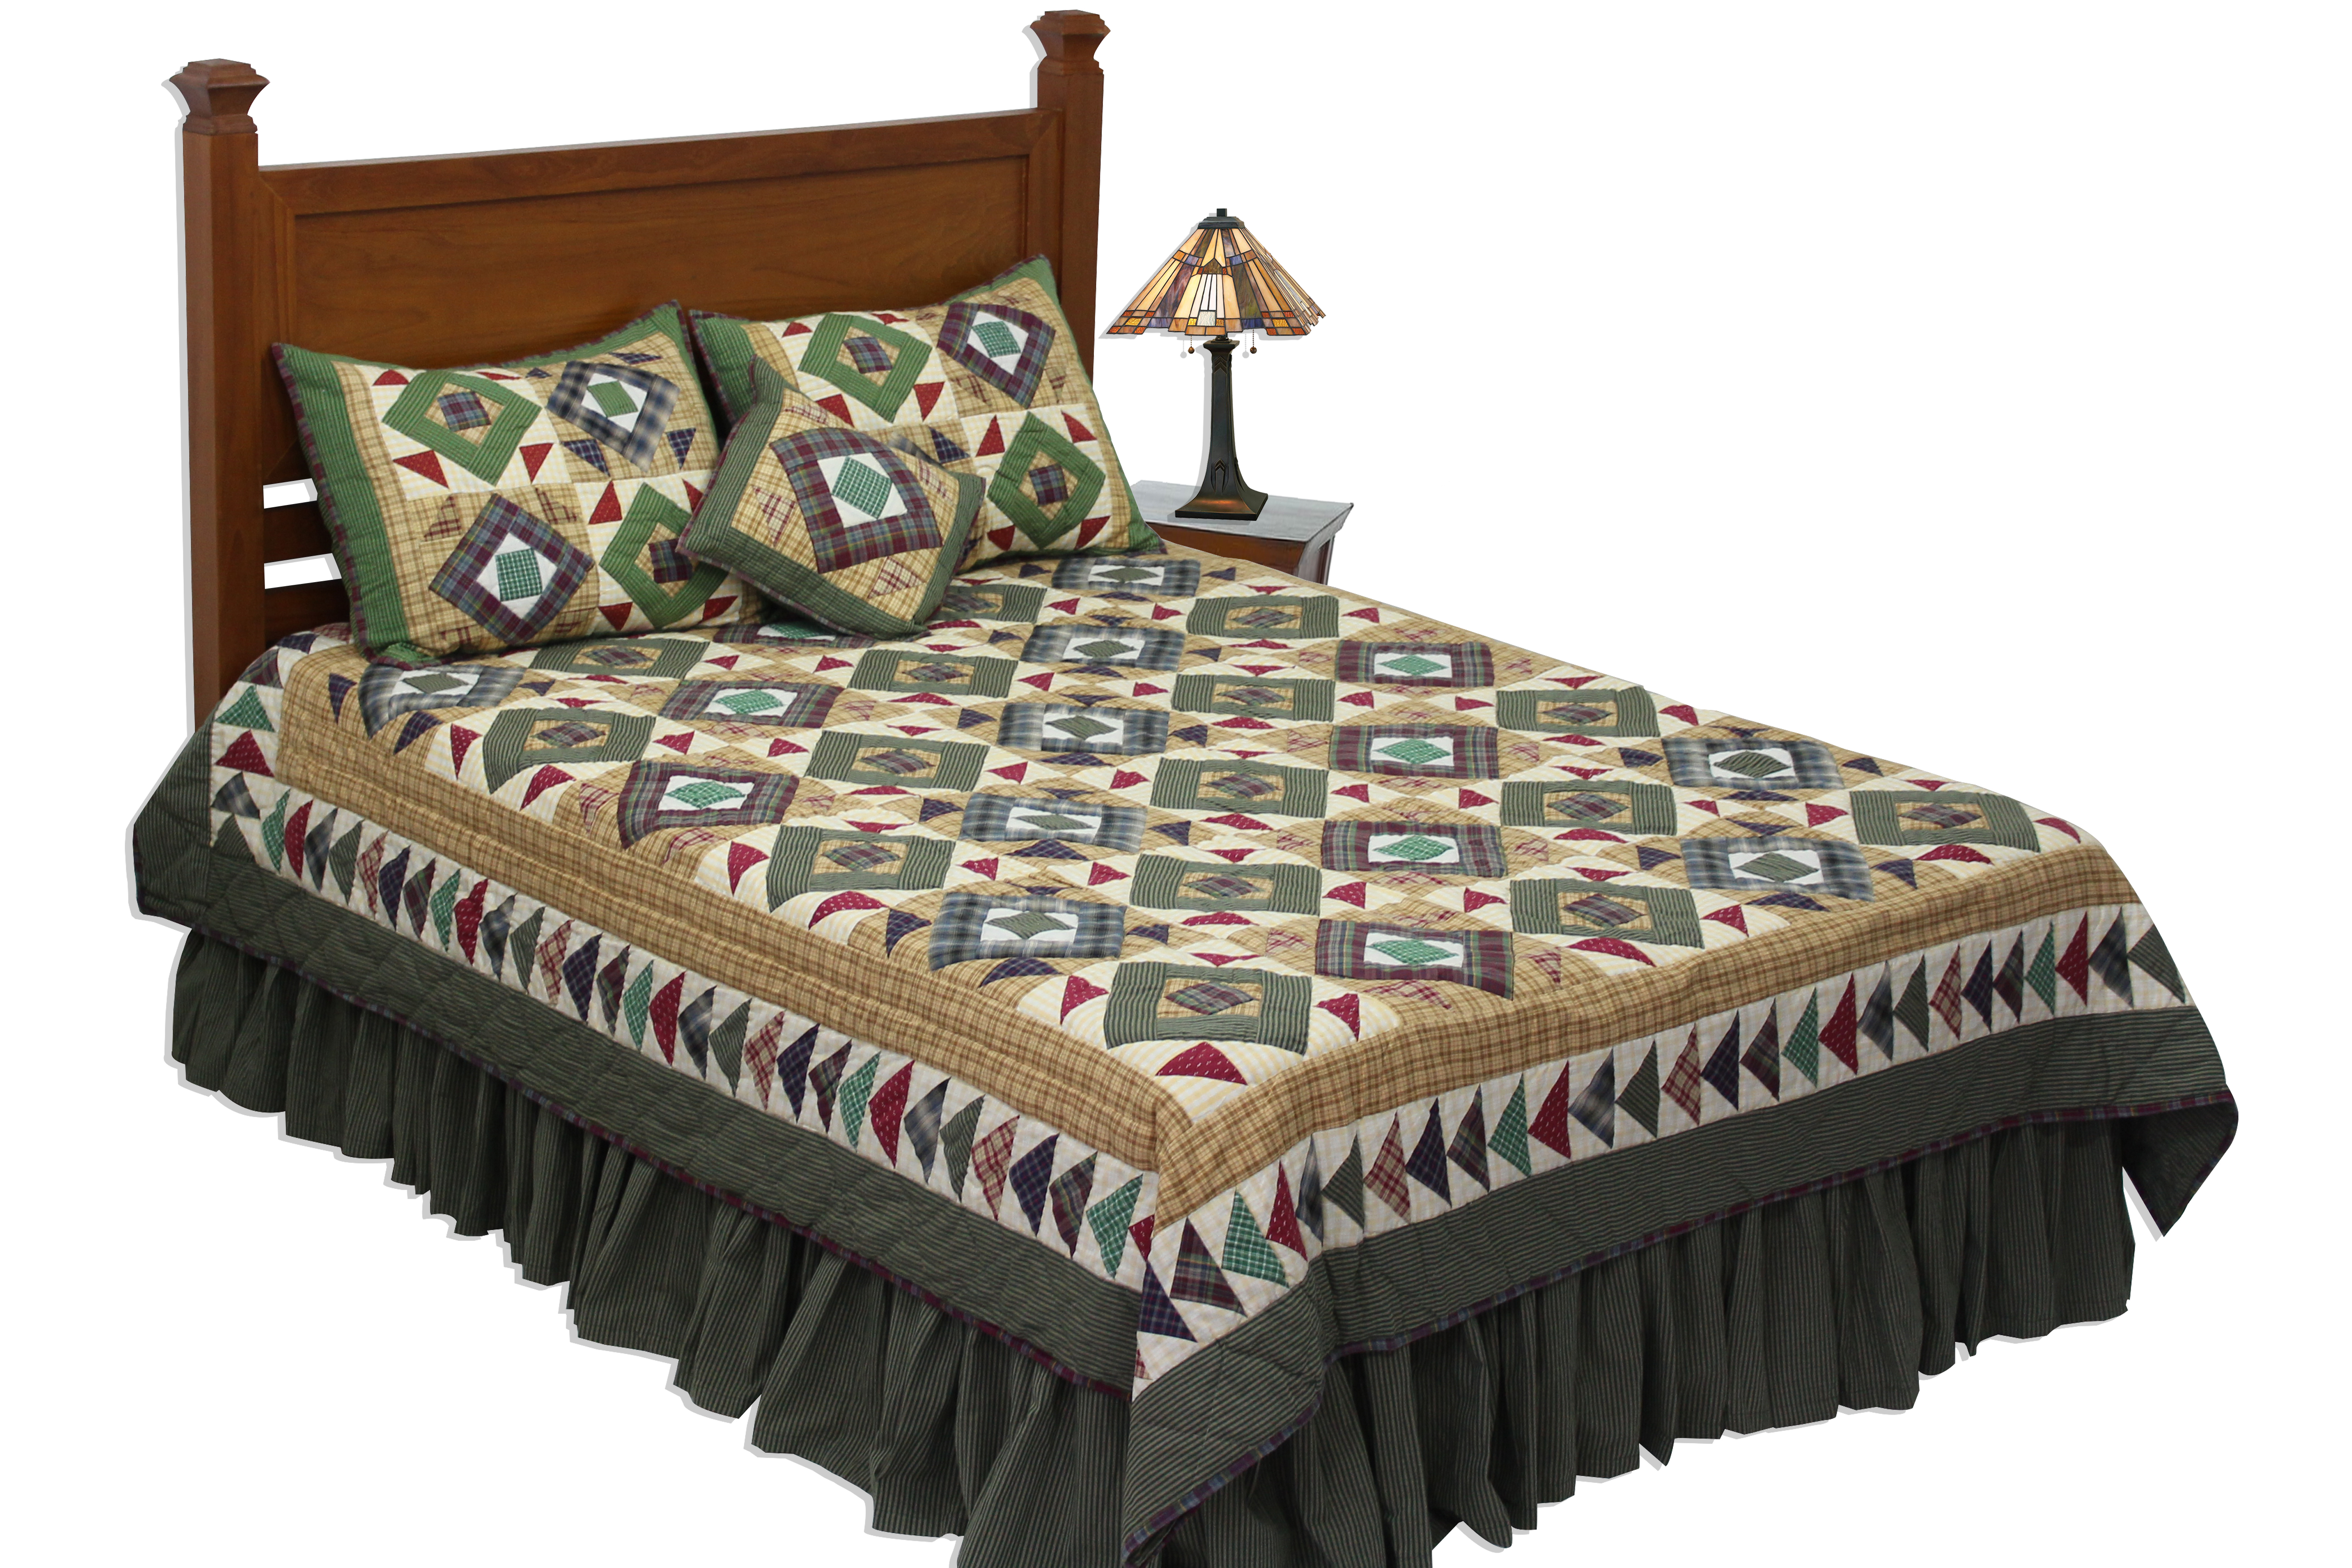 Buy a Twin Size Quilt and Get a Matching Pillow Shams FREE | Square Diamond Twin Quilt 65"W x 85"L